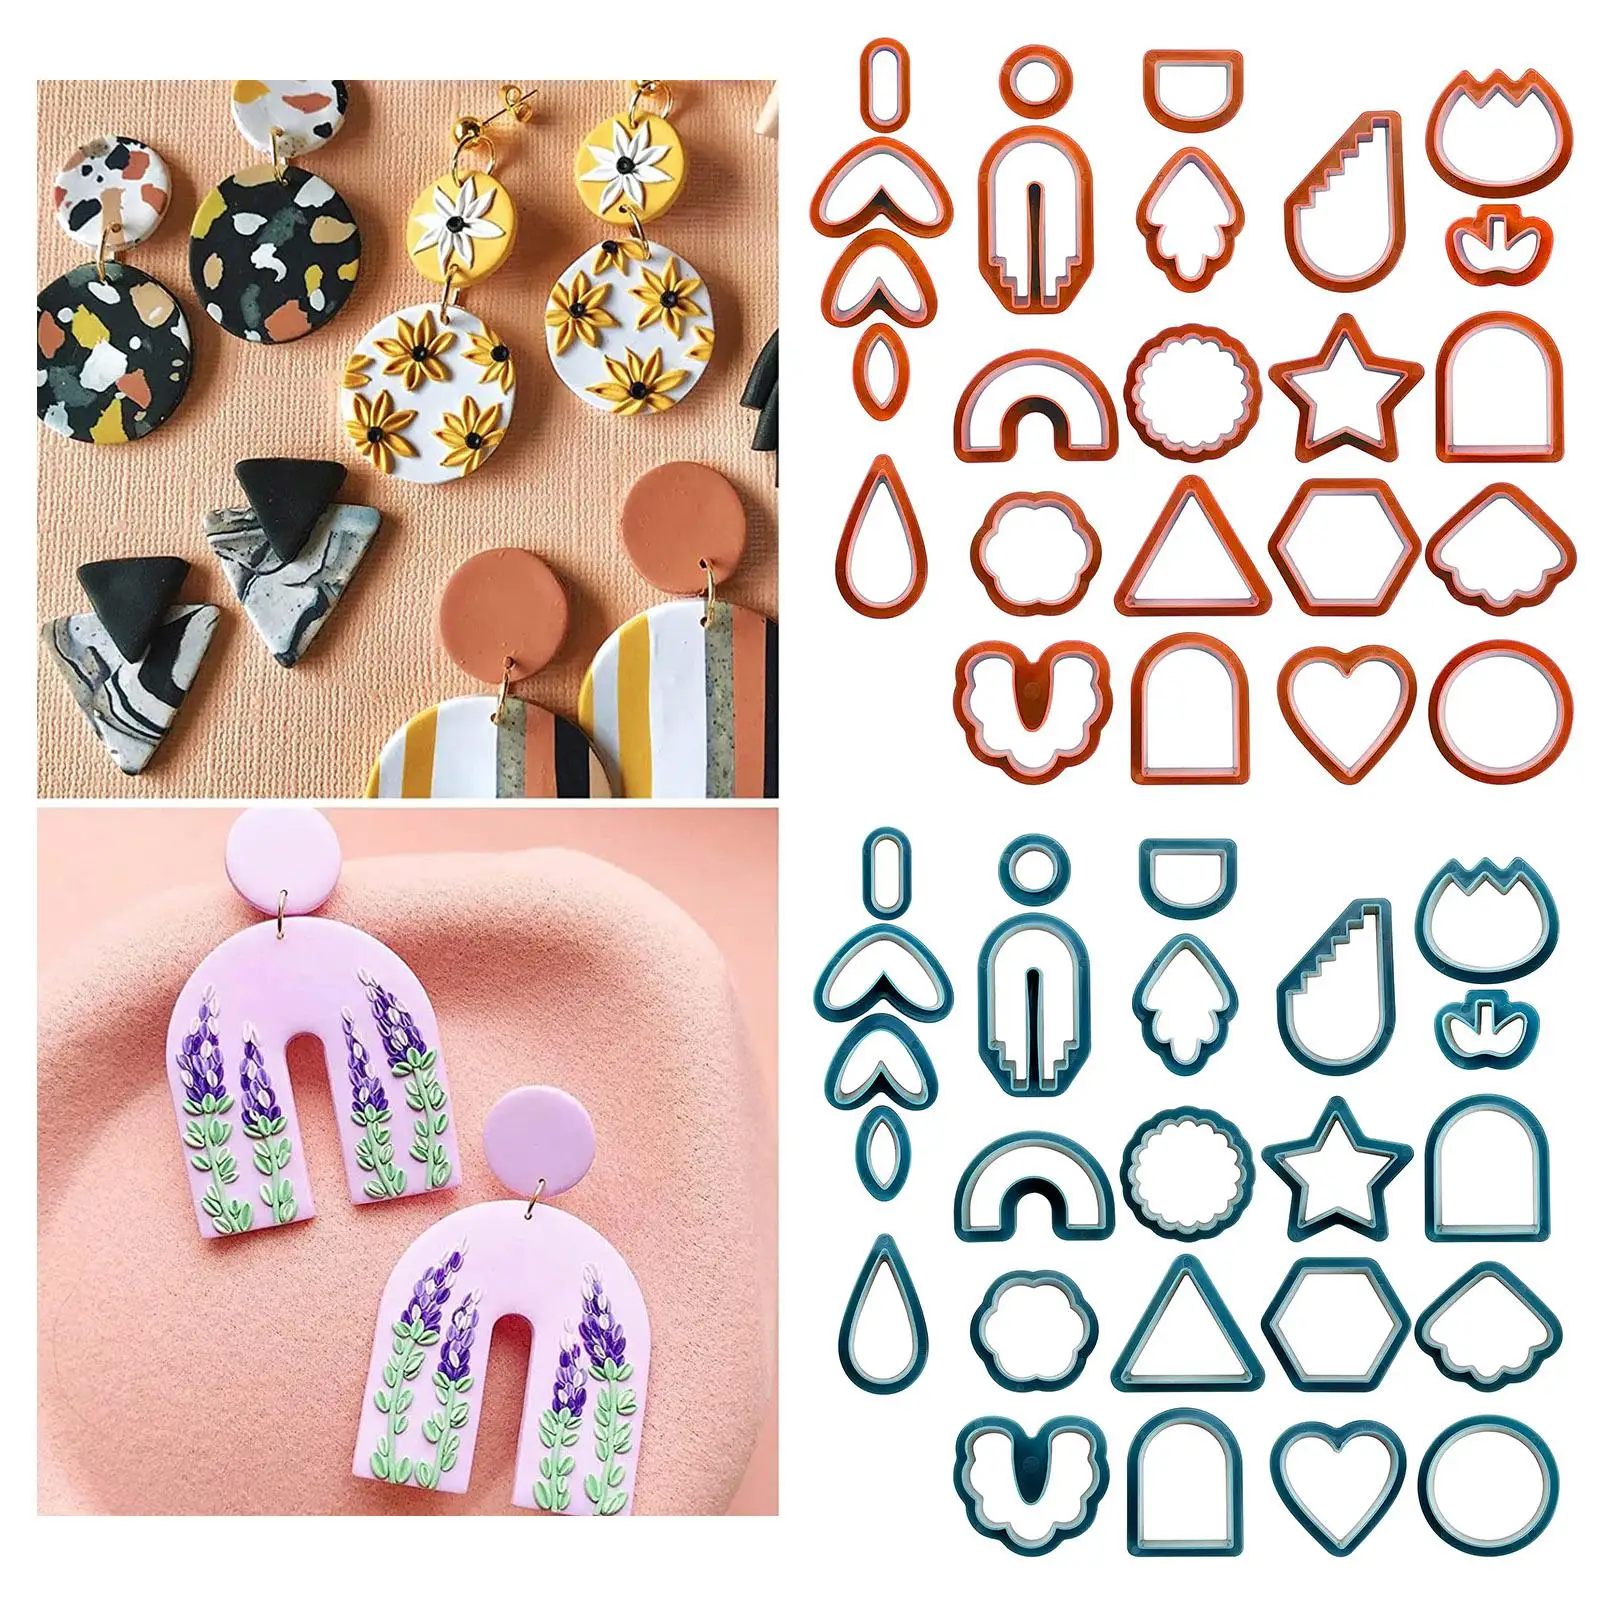 24Pcs Polymer Clay Cutter Set Earrings Different Shapes Jewelry Making Crafts DIY Polymer Clay Jewelry Kids Clay Cutting Tools